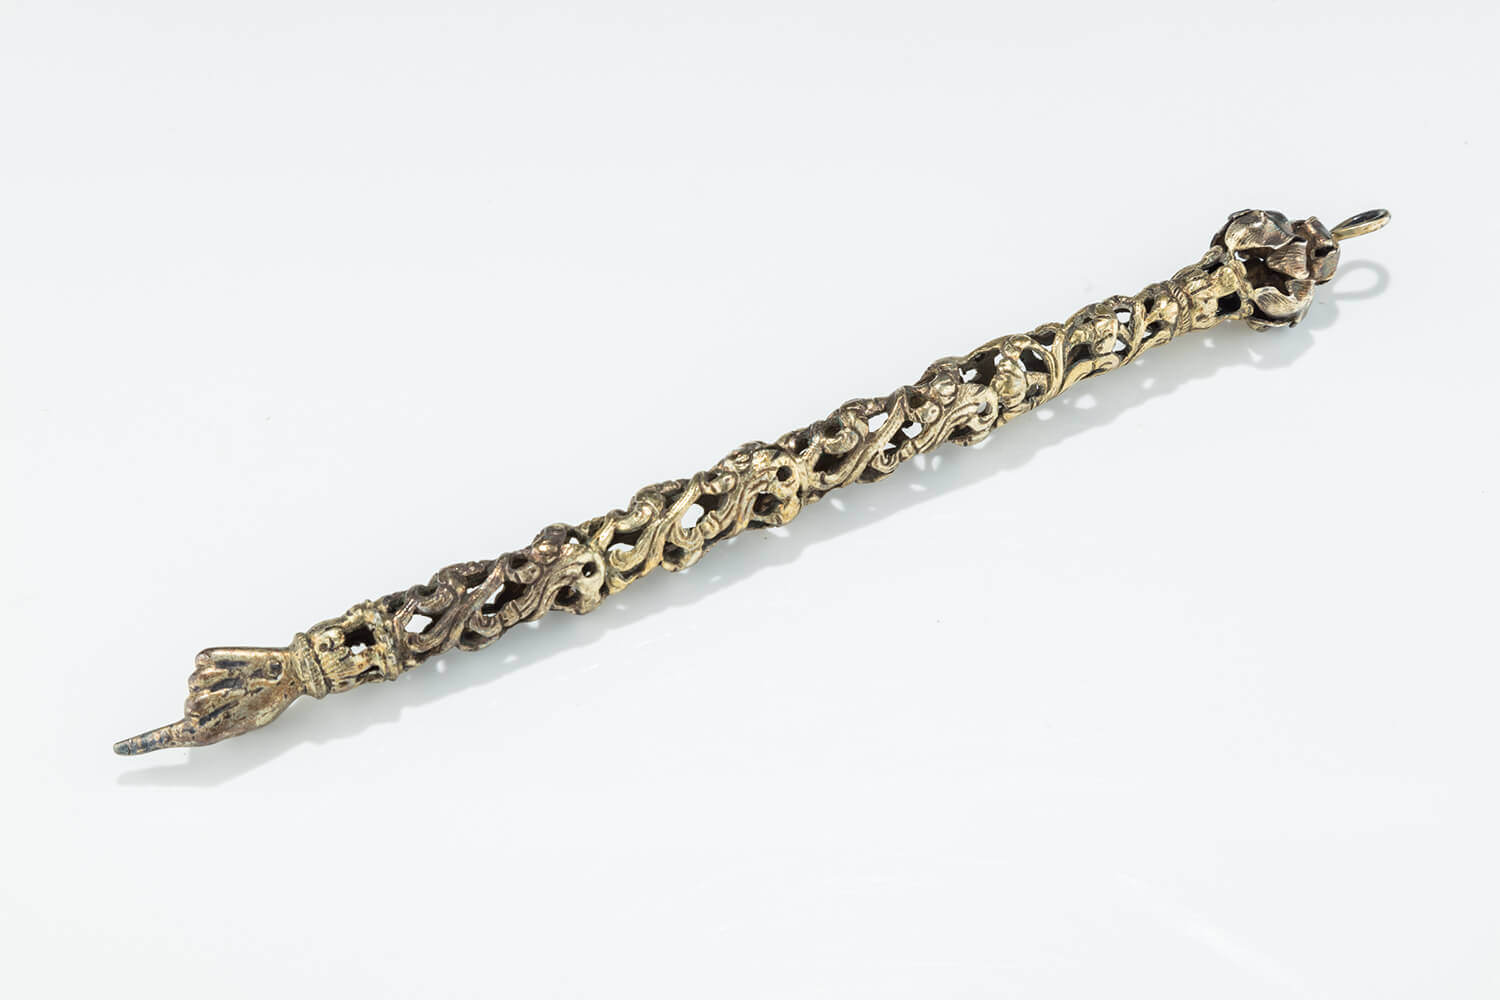 099. A RARE AND IMPORTANT SILVER TORAH POINTER